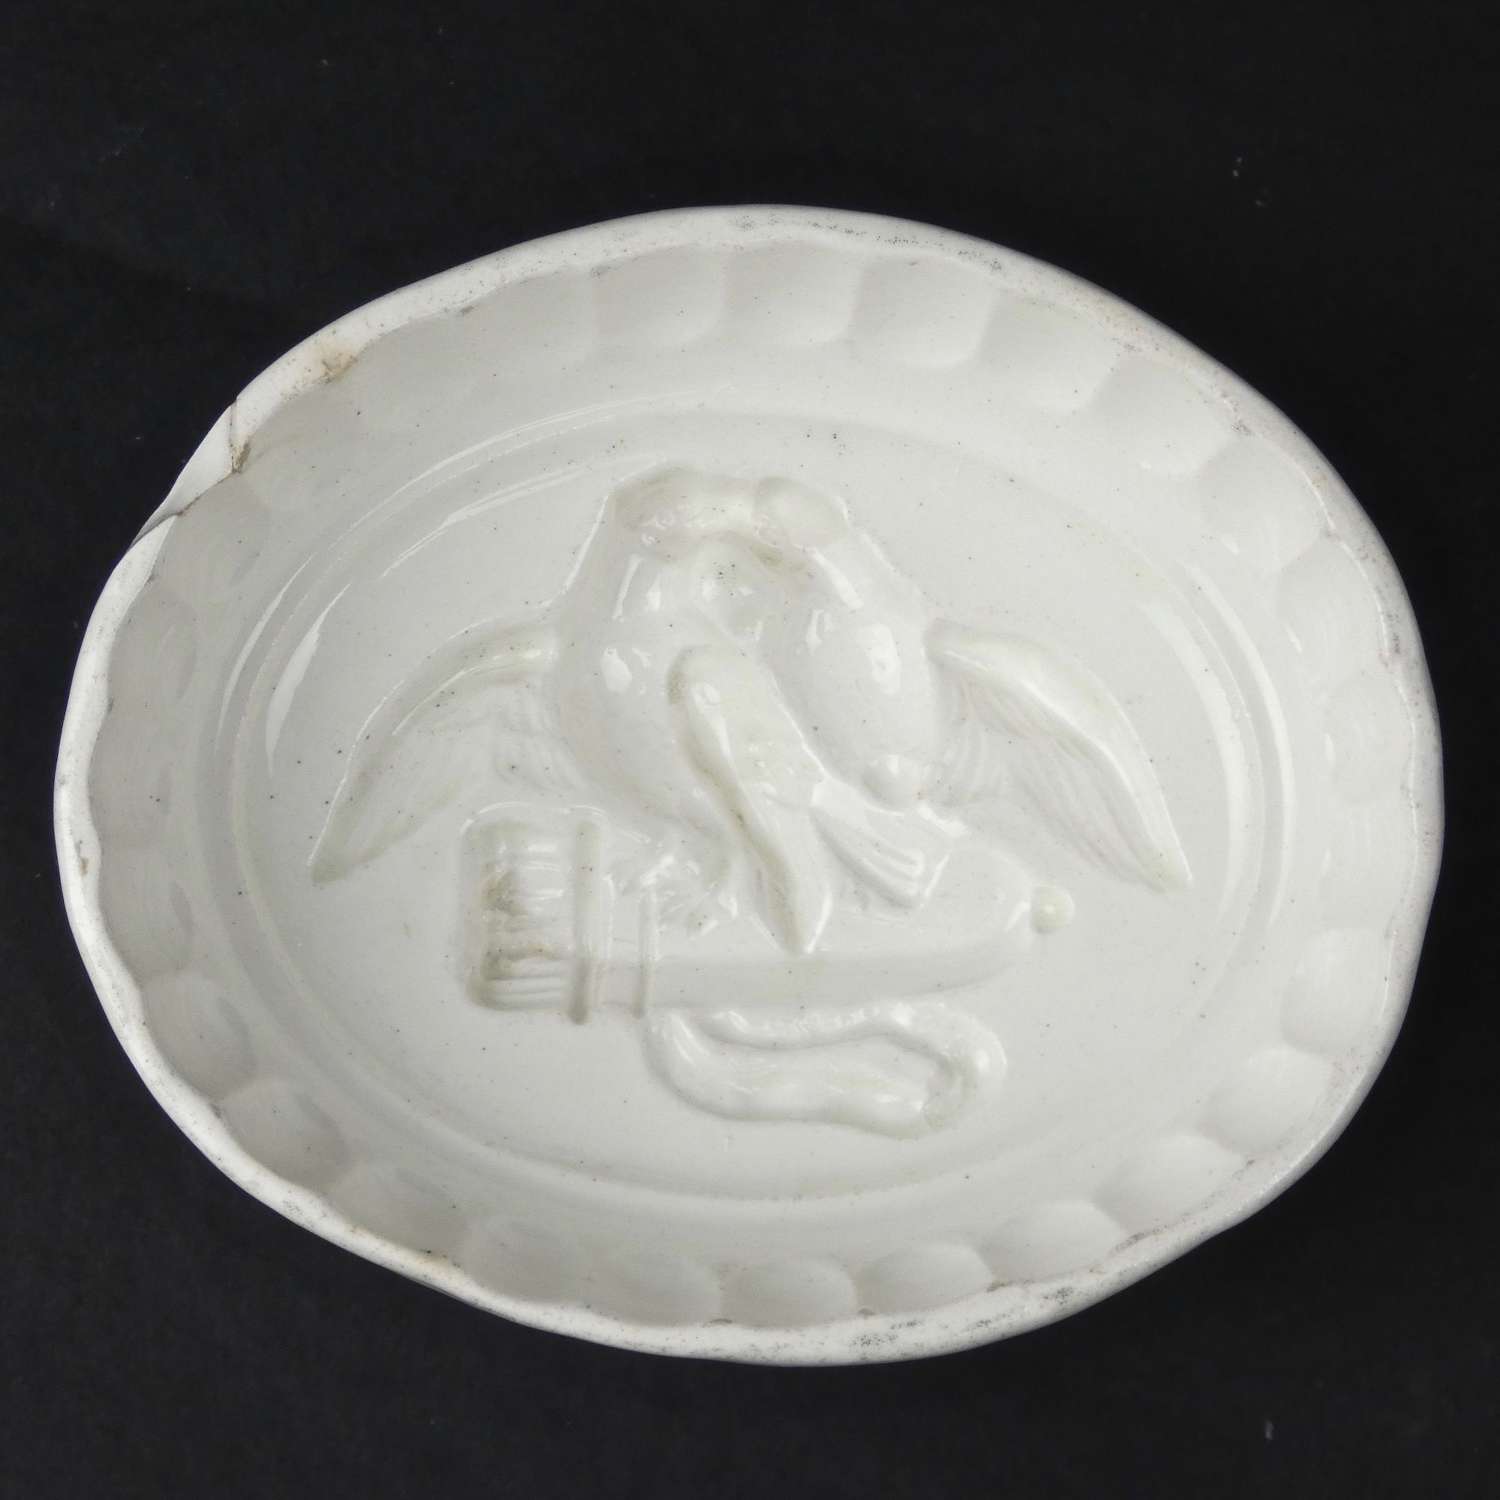 Wedgwood mould showing birds on a quiver